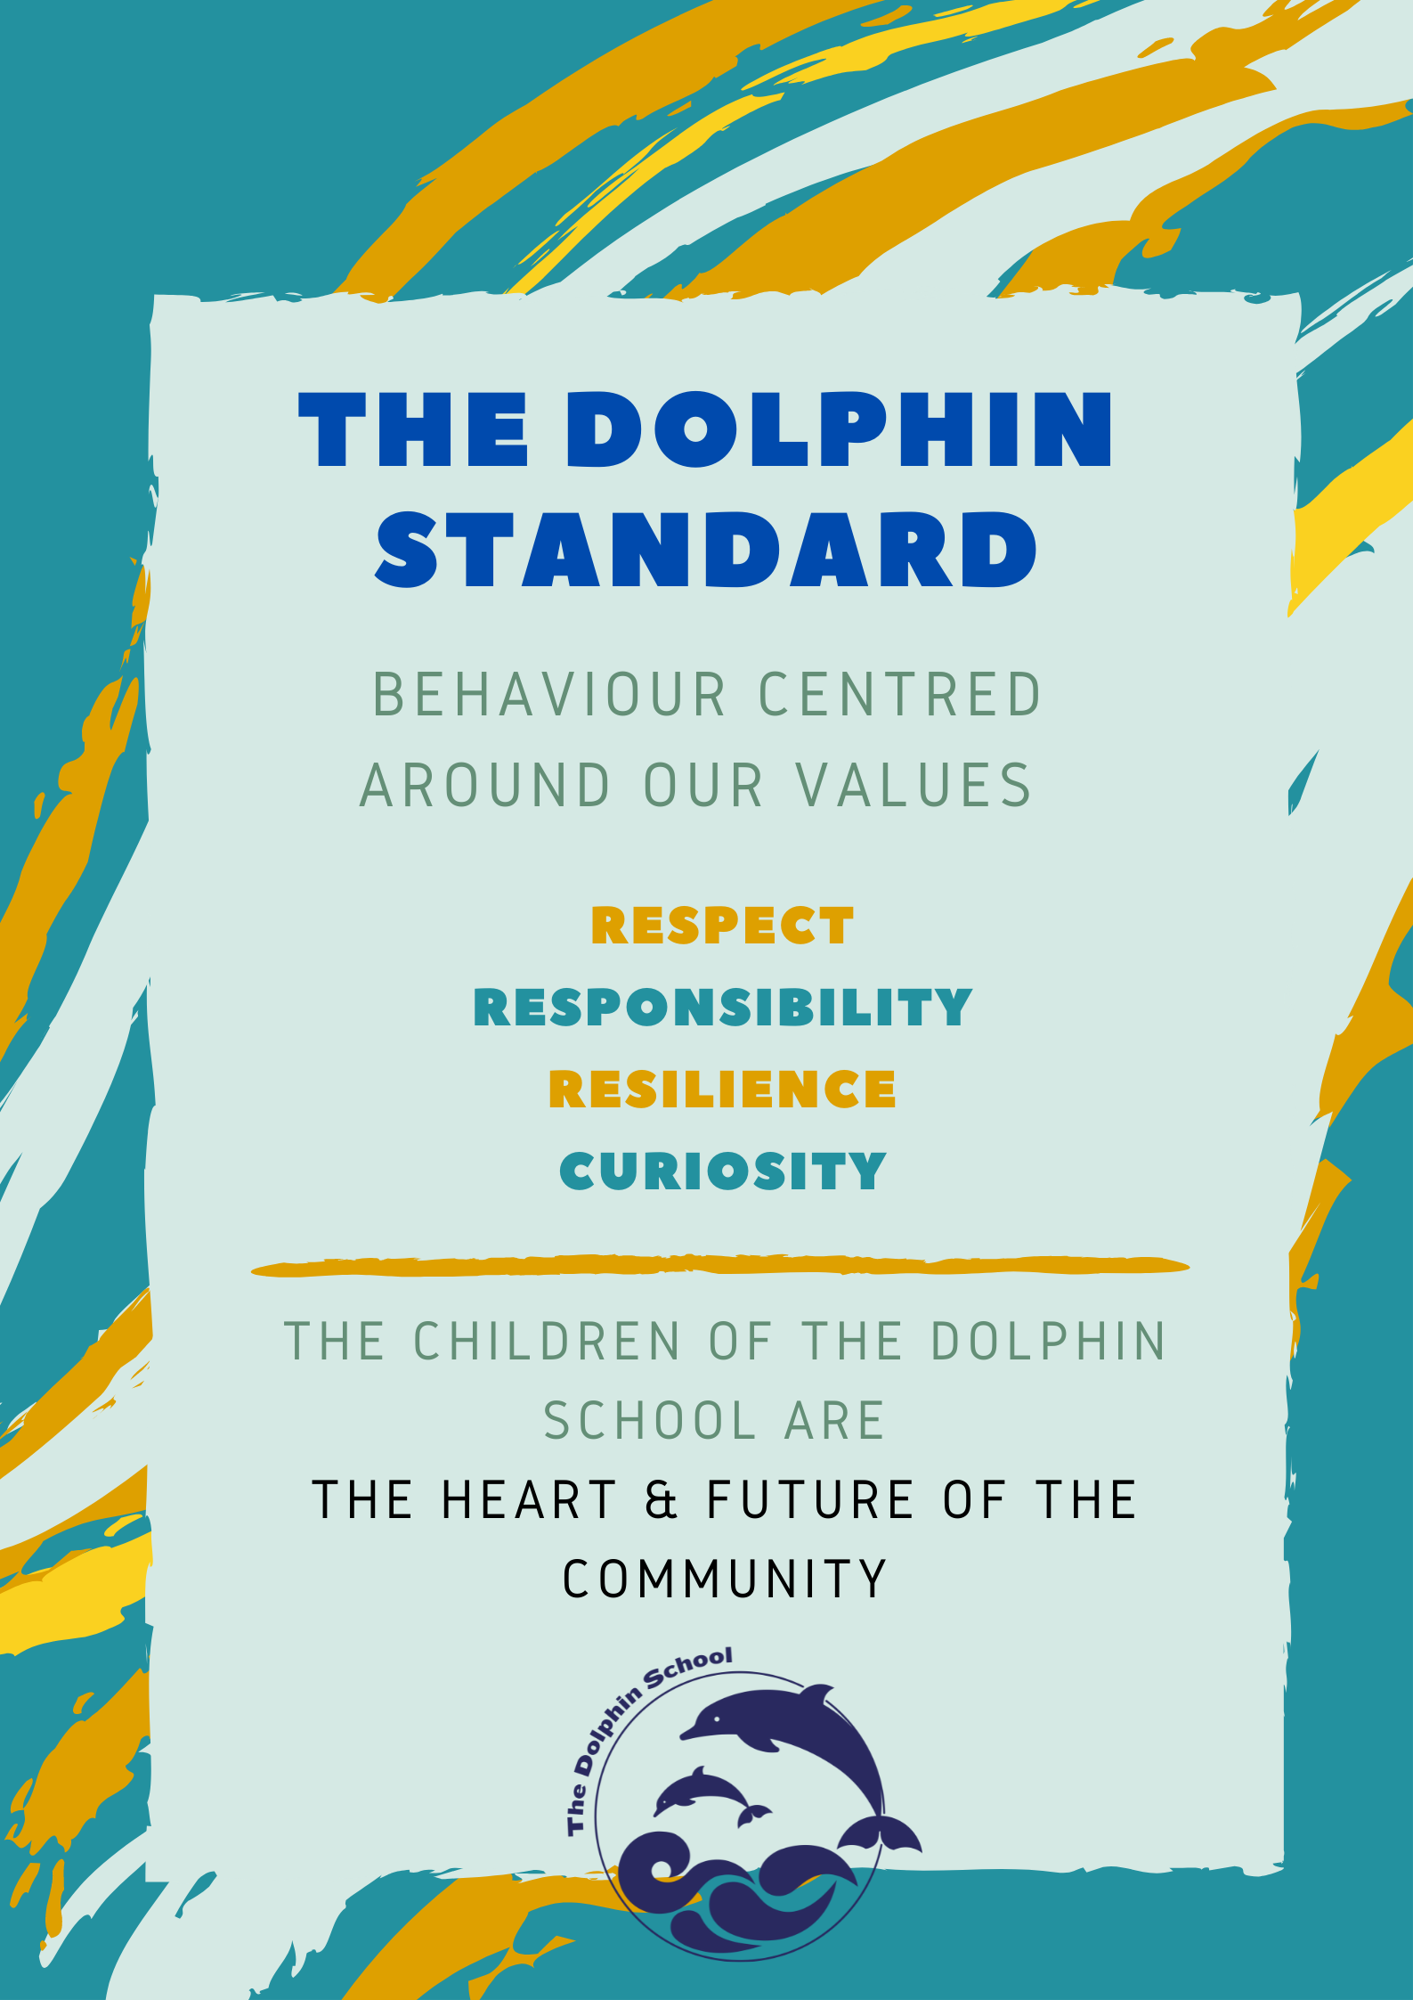 The dolphin standard